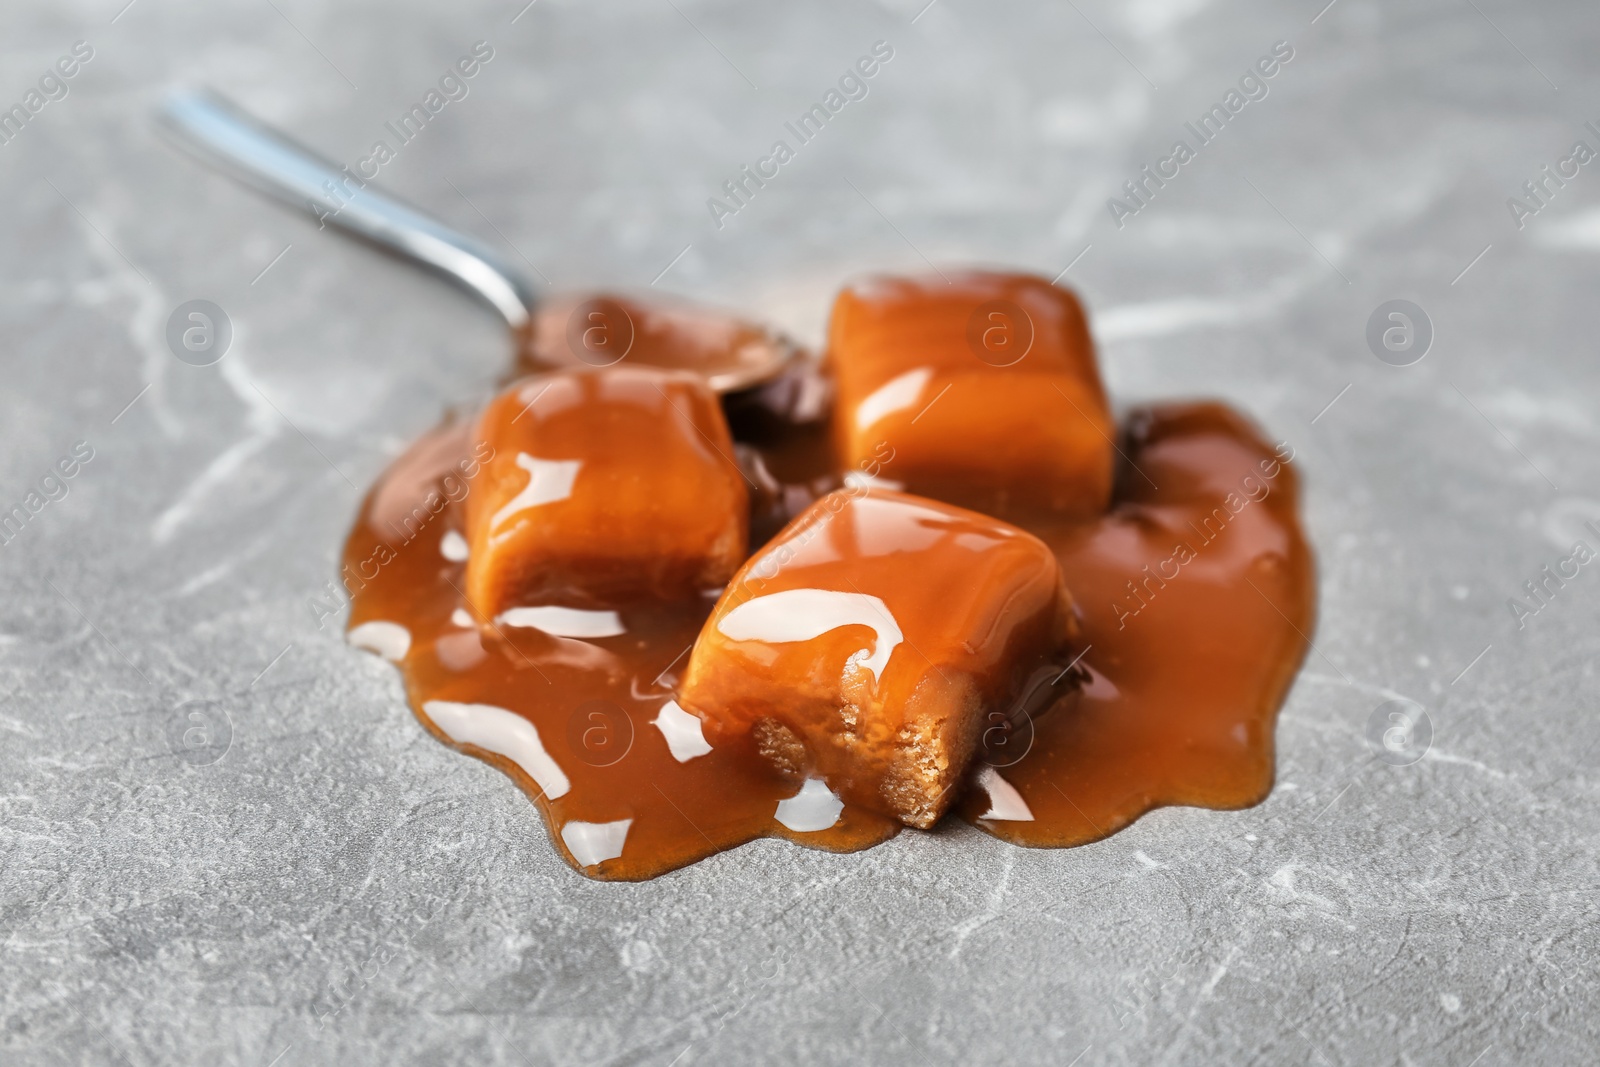 Photo of Delicious candies with caramel sauce on table